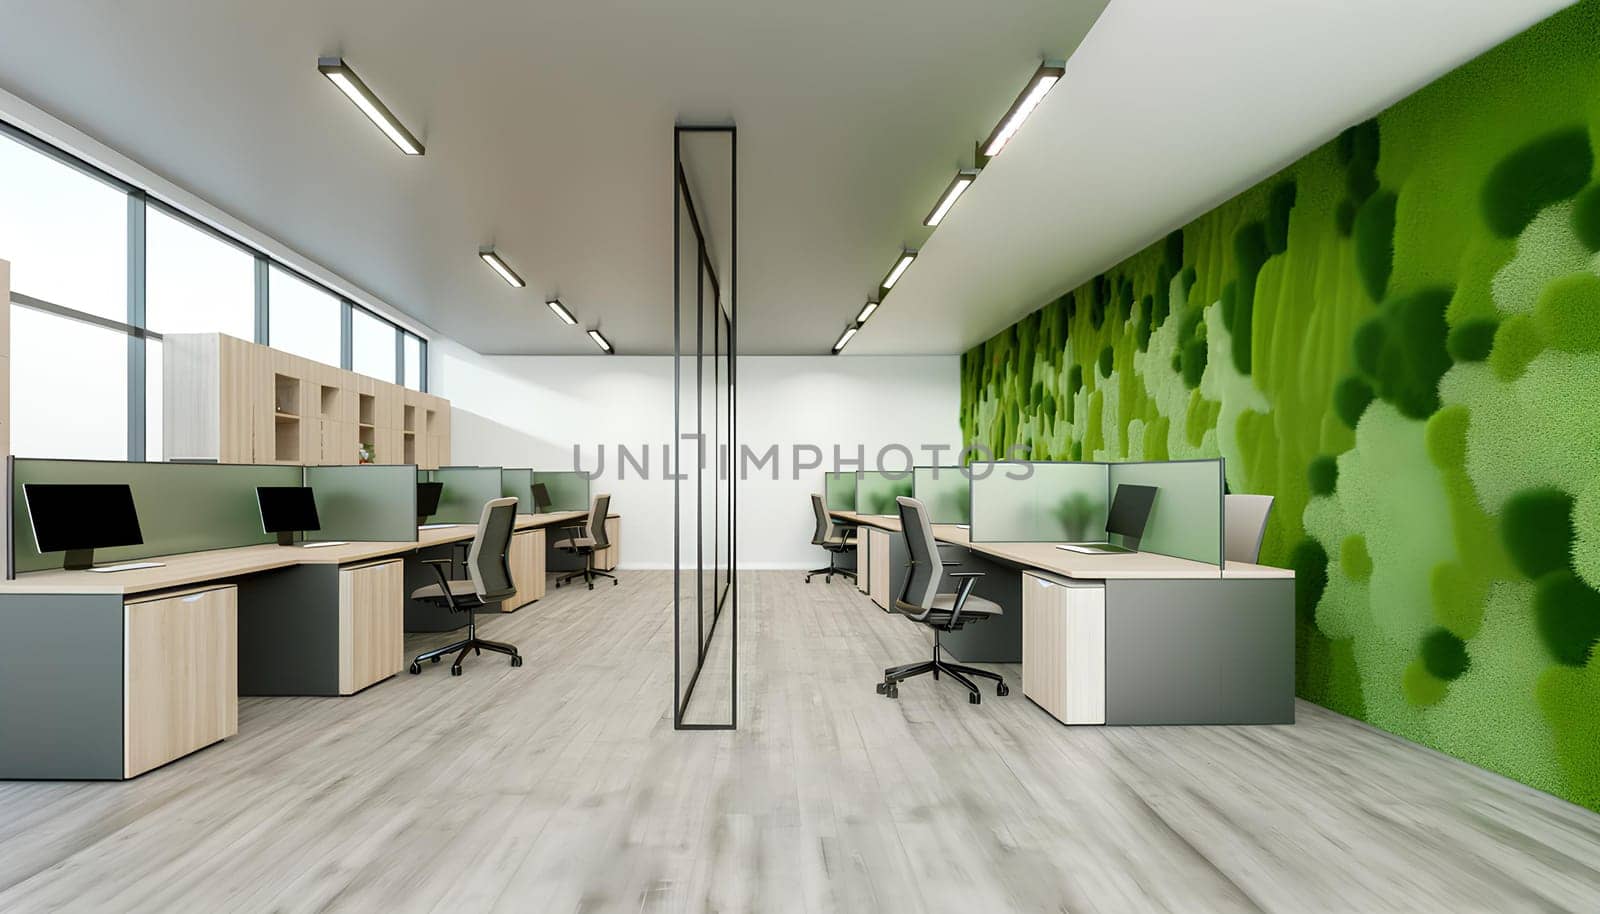 Decorative preserved forest moss on the wall in office interior, environmental design concept. by Annado